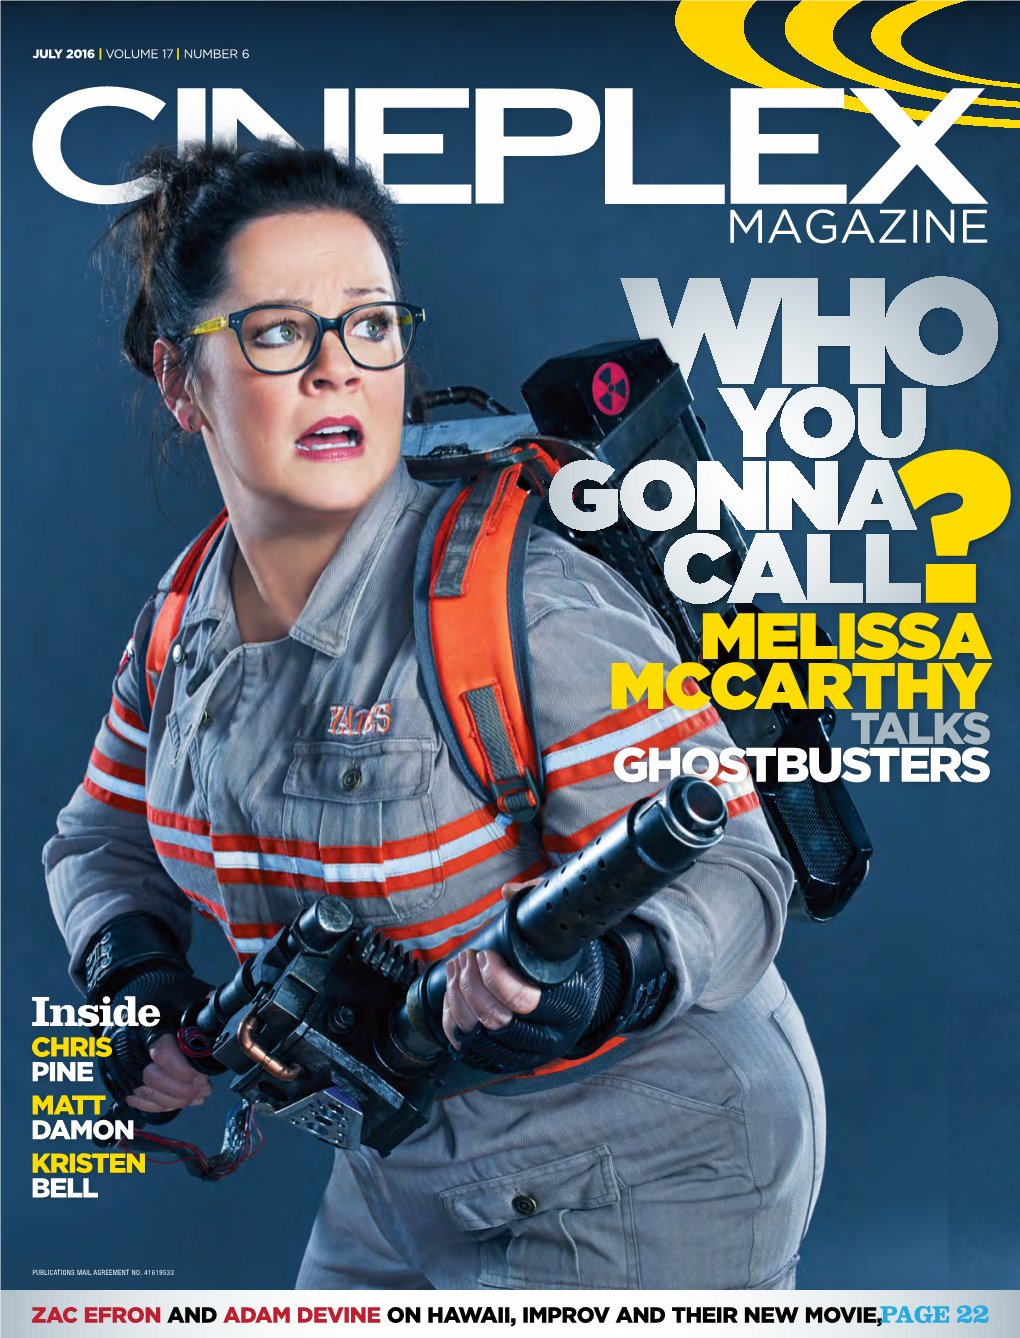 You Gonna Call Melissa Mccarthy Talks Ghostbusters